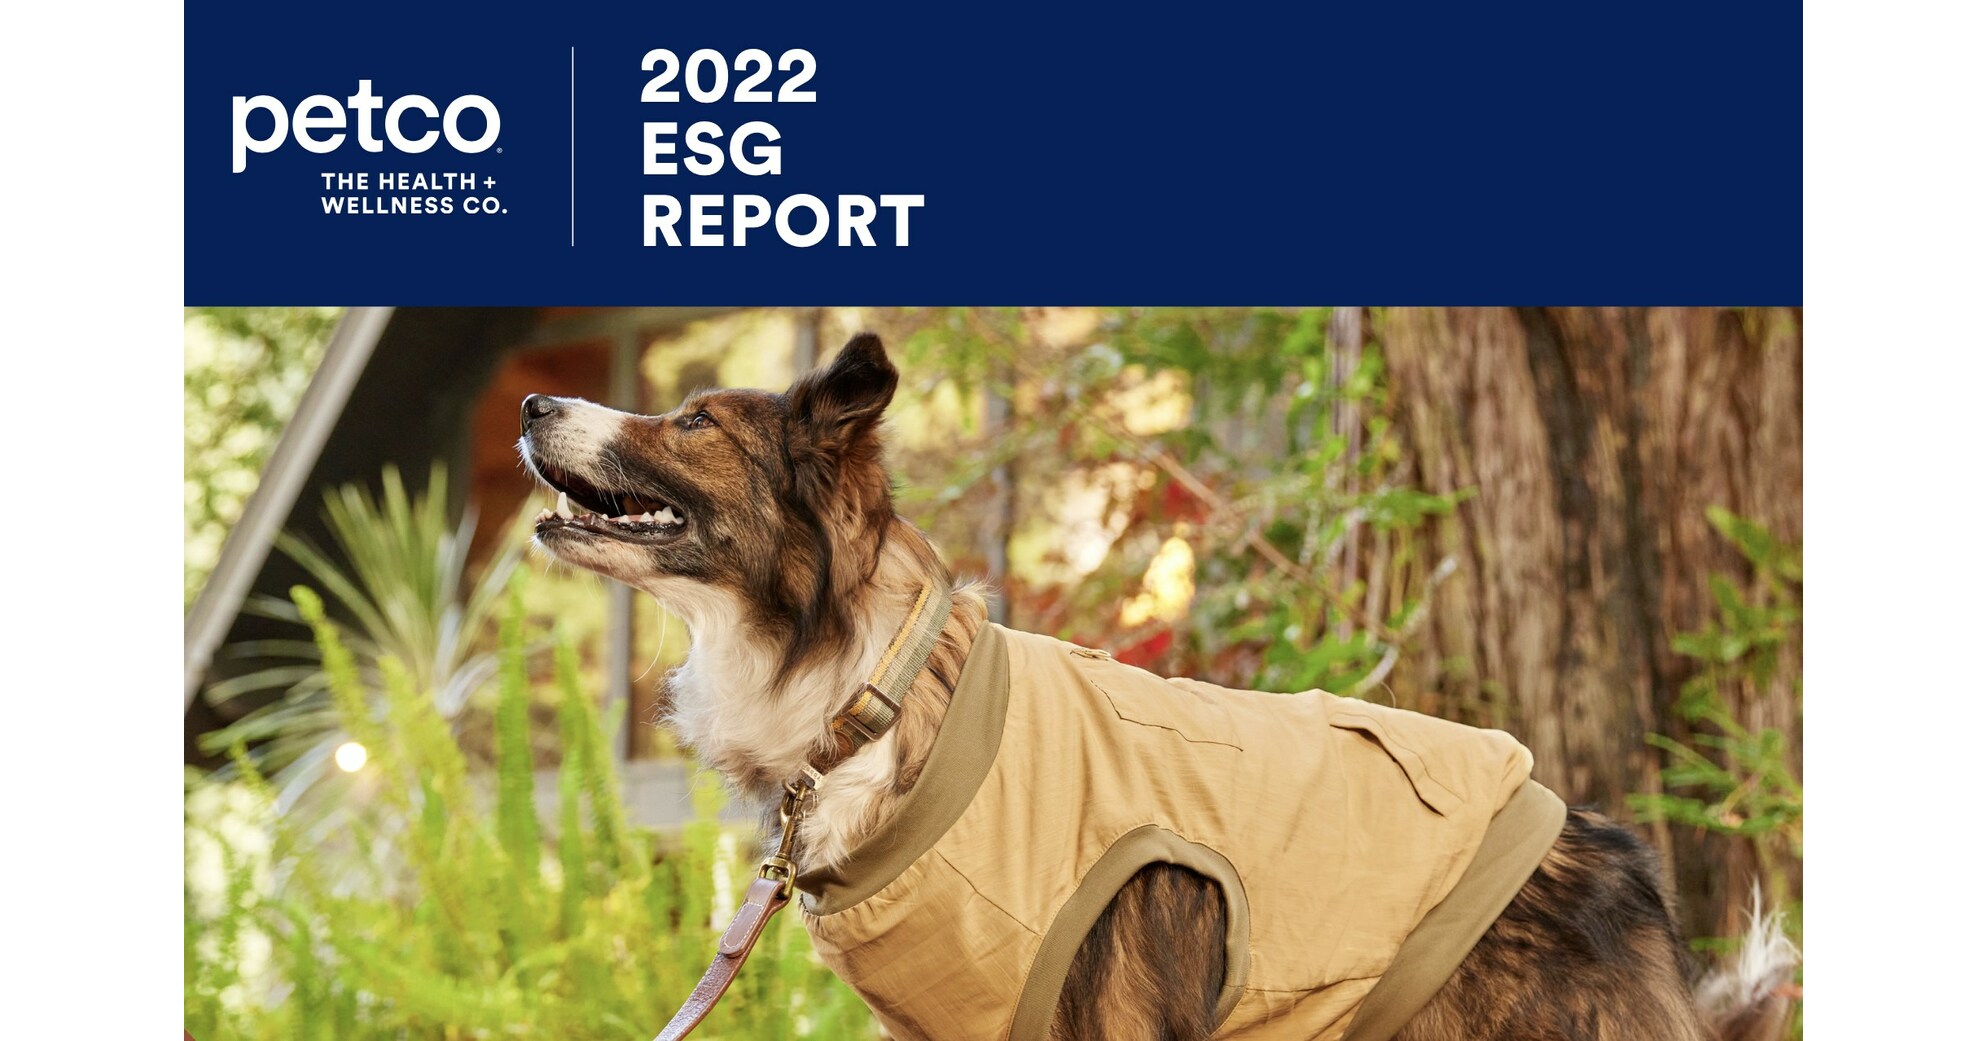 Petco Demonstrates Progress in Supporting the Health of Pets, People and Planet in Latest ESG Report